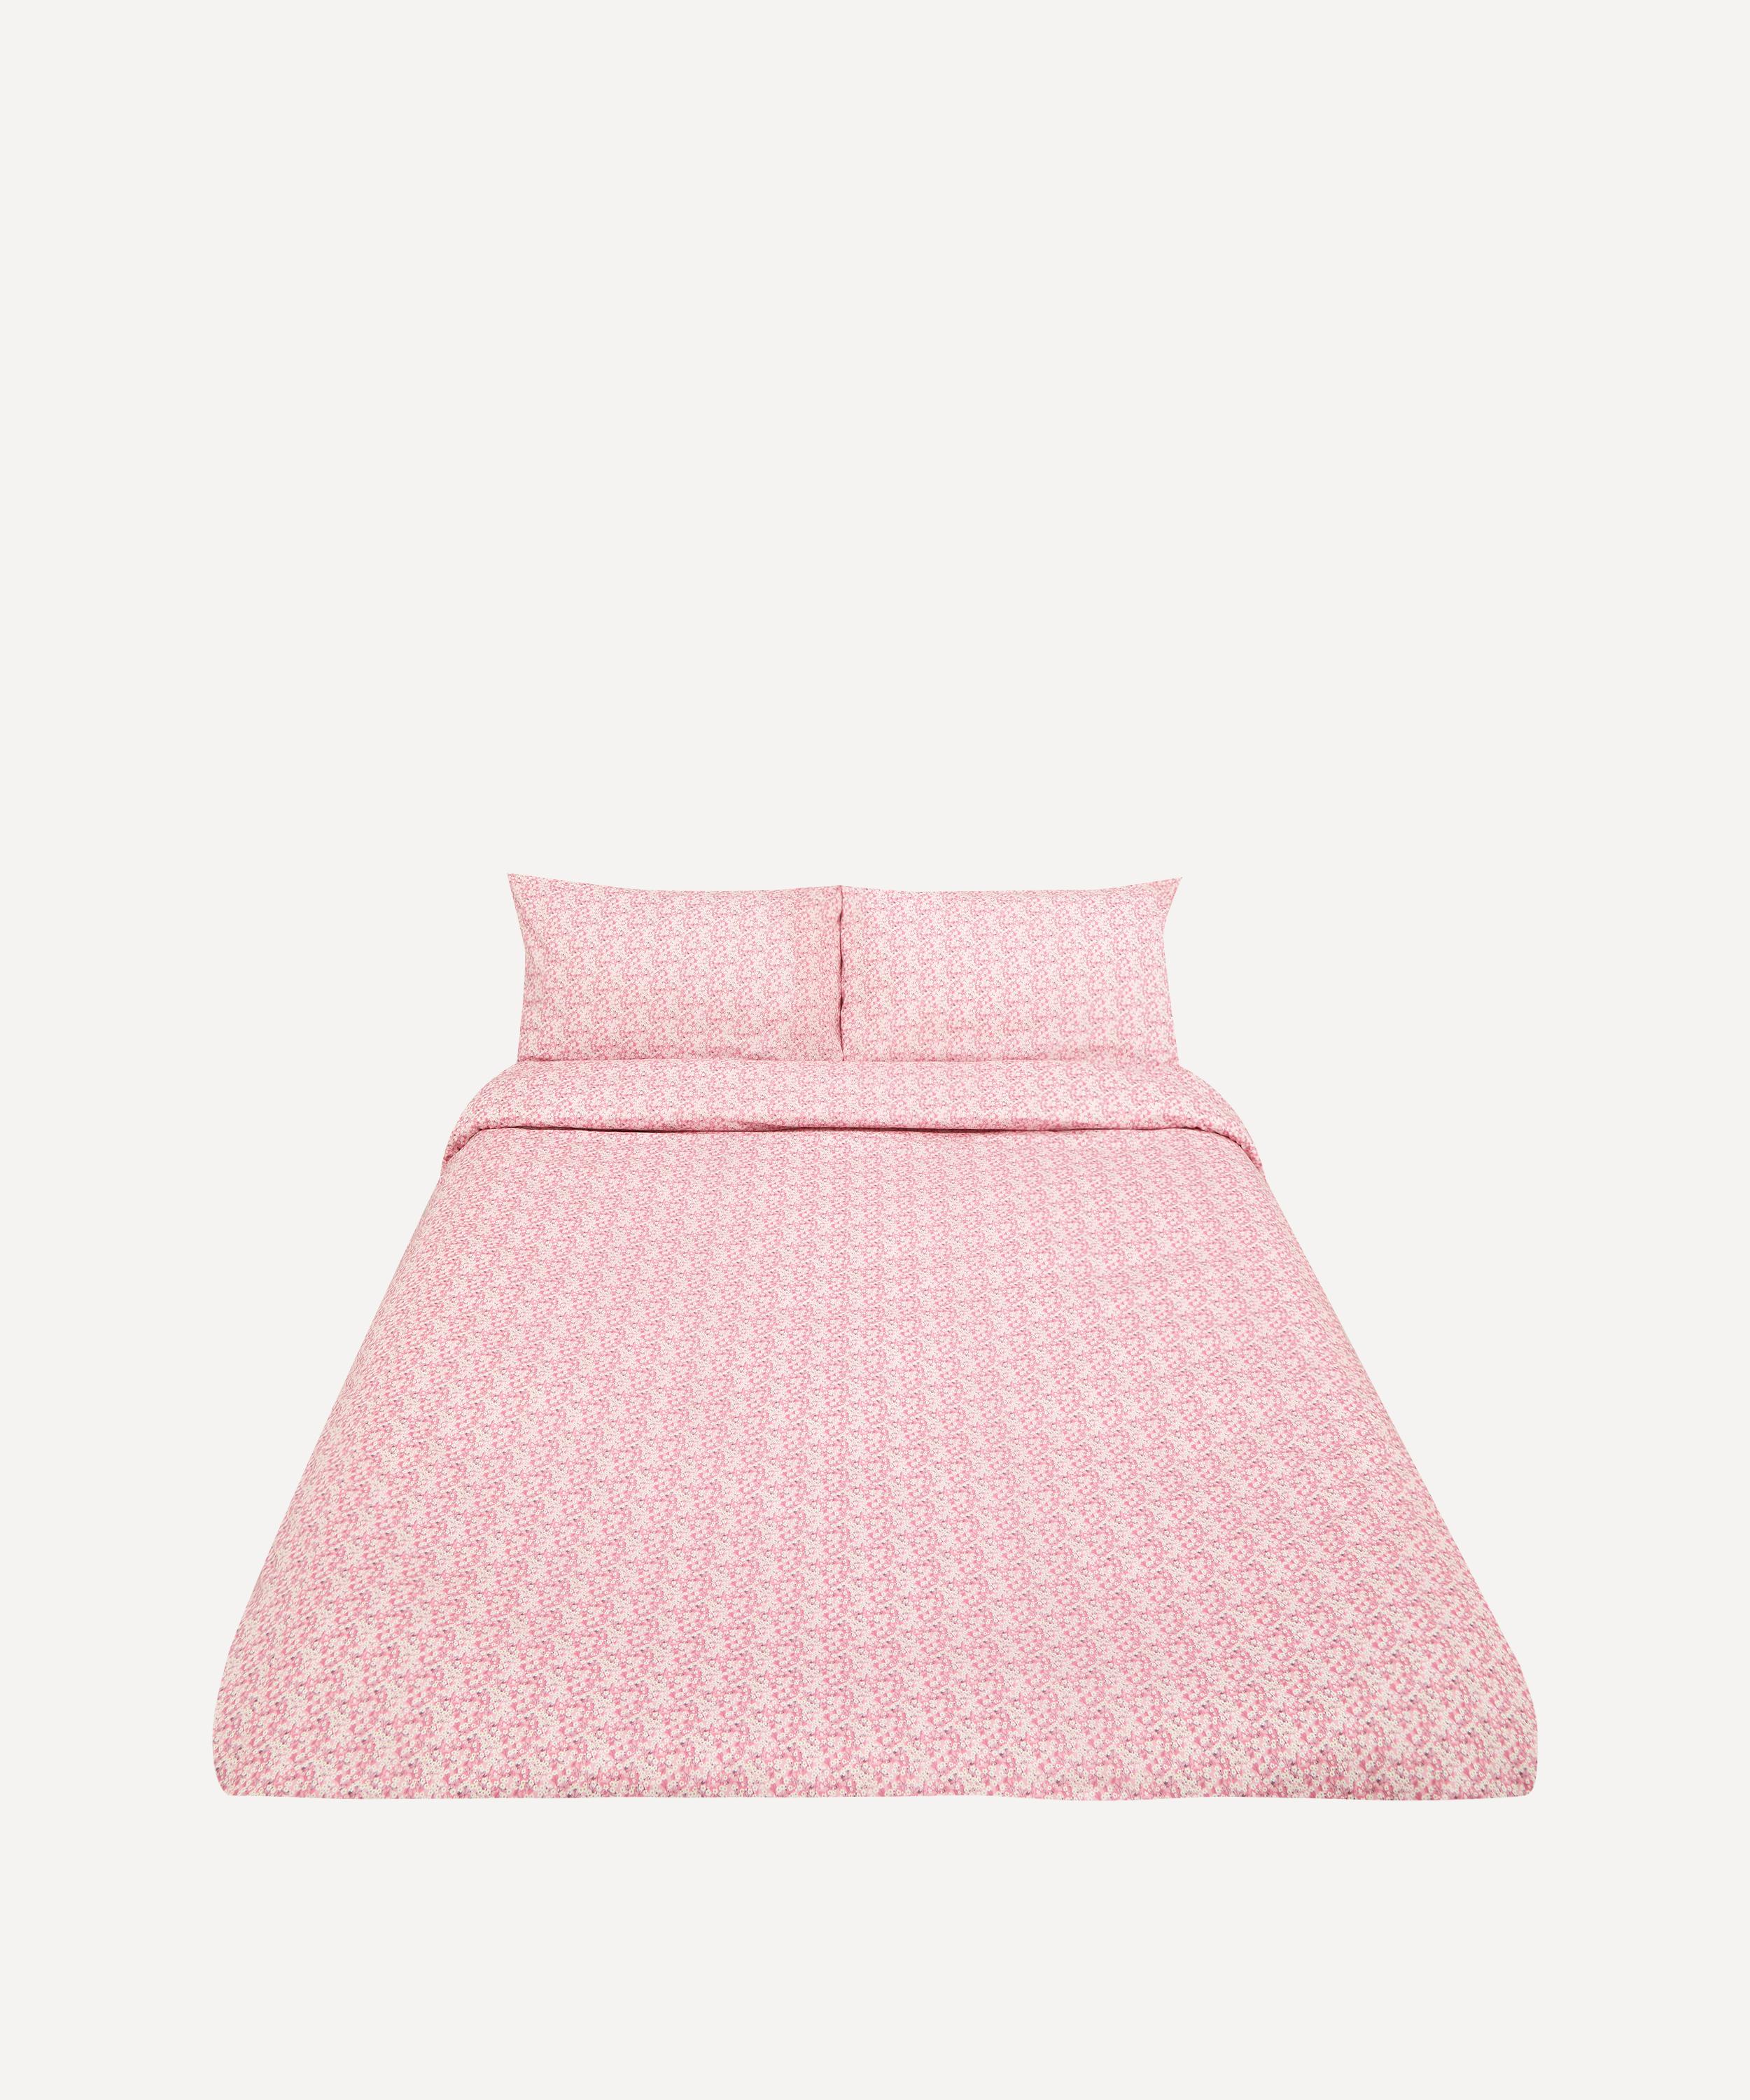 Coco & Wolf - Mitsi Valeria Double Duvet Cover Set image number null